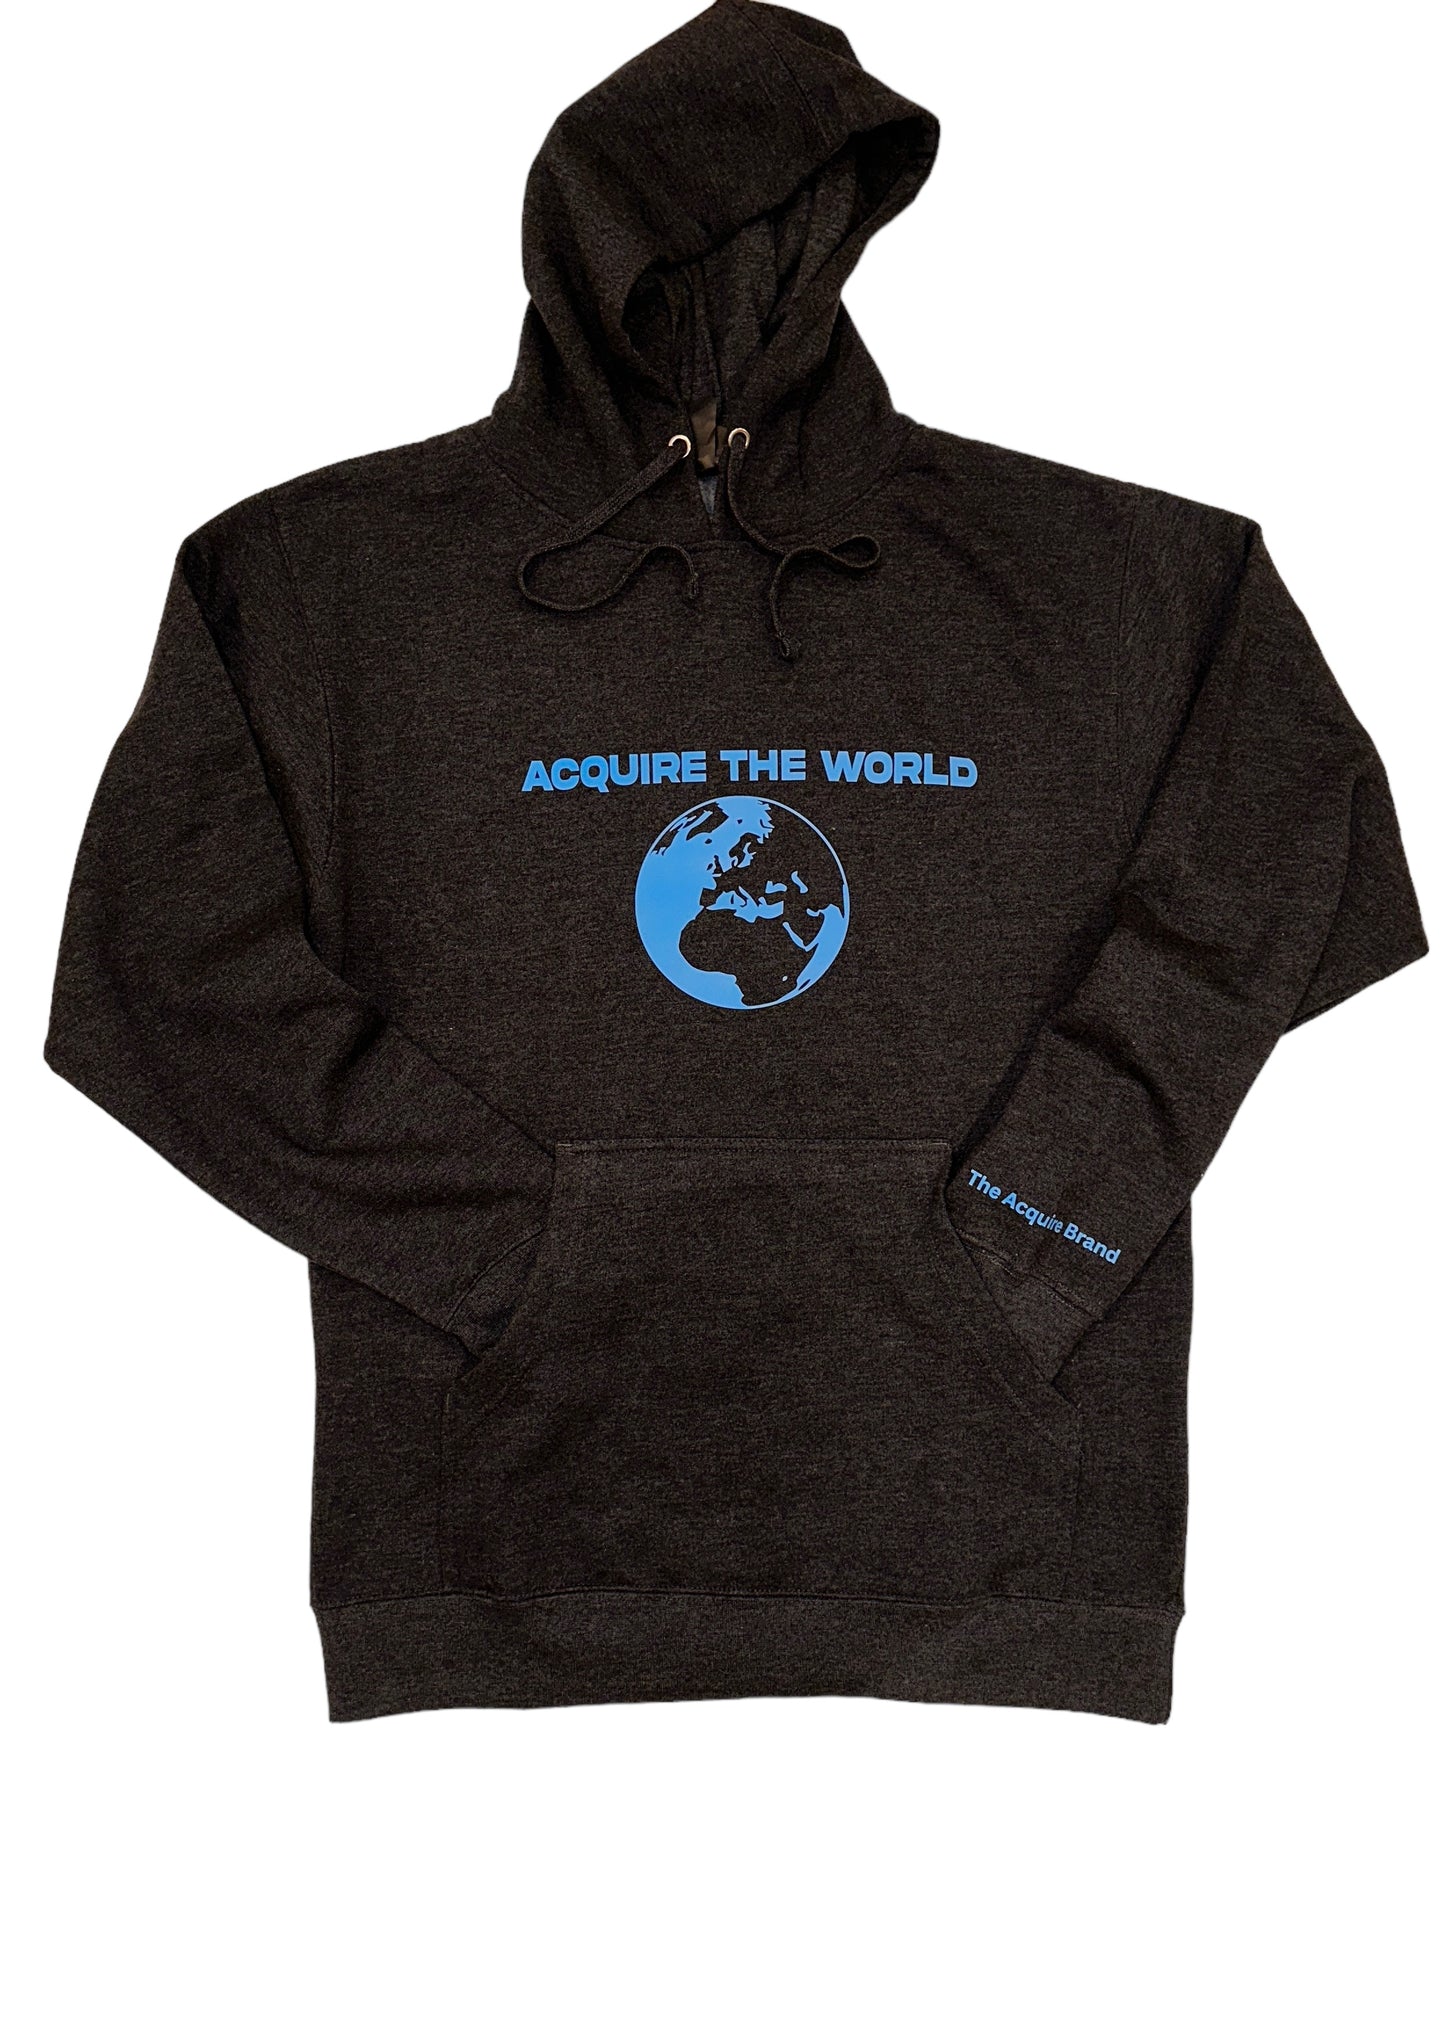 Classic Dark Charcoal Grey Acquire The World Hoodies